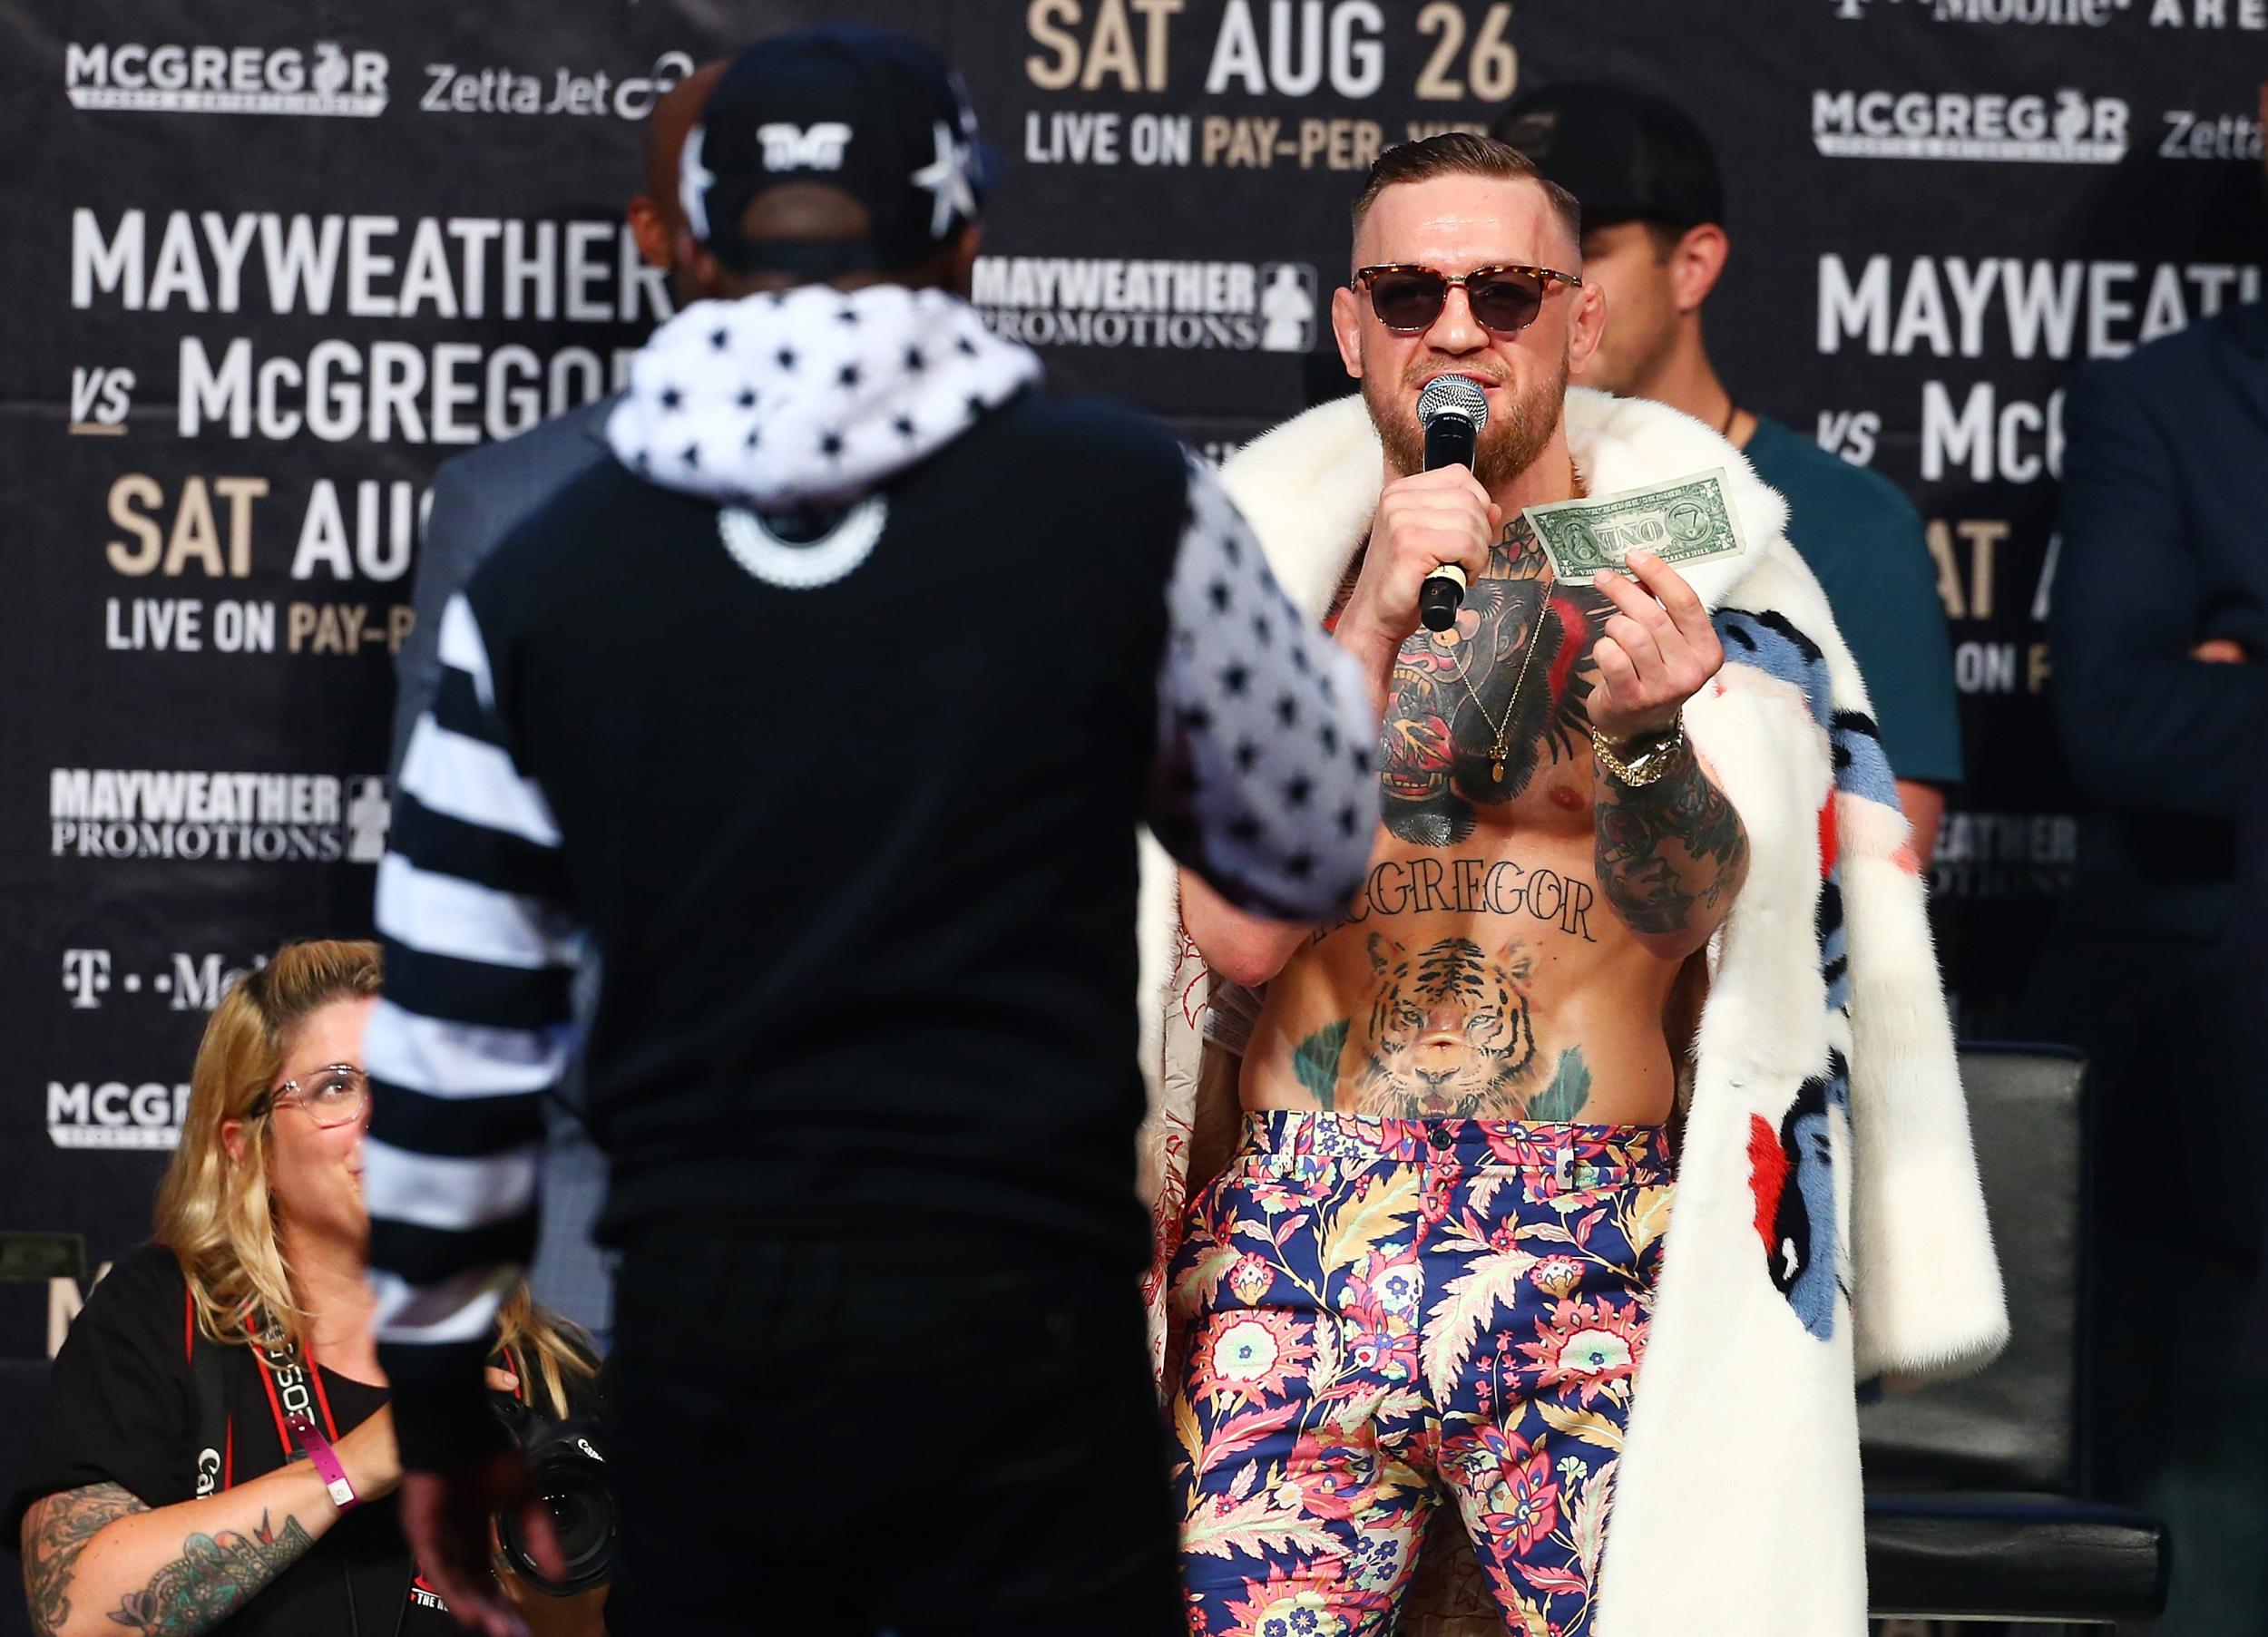 McGregor v Mayweather in numbers: The staggering figures ahead of potential  billion dollar fight - Dublin Live